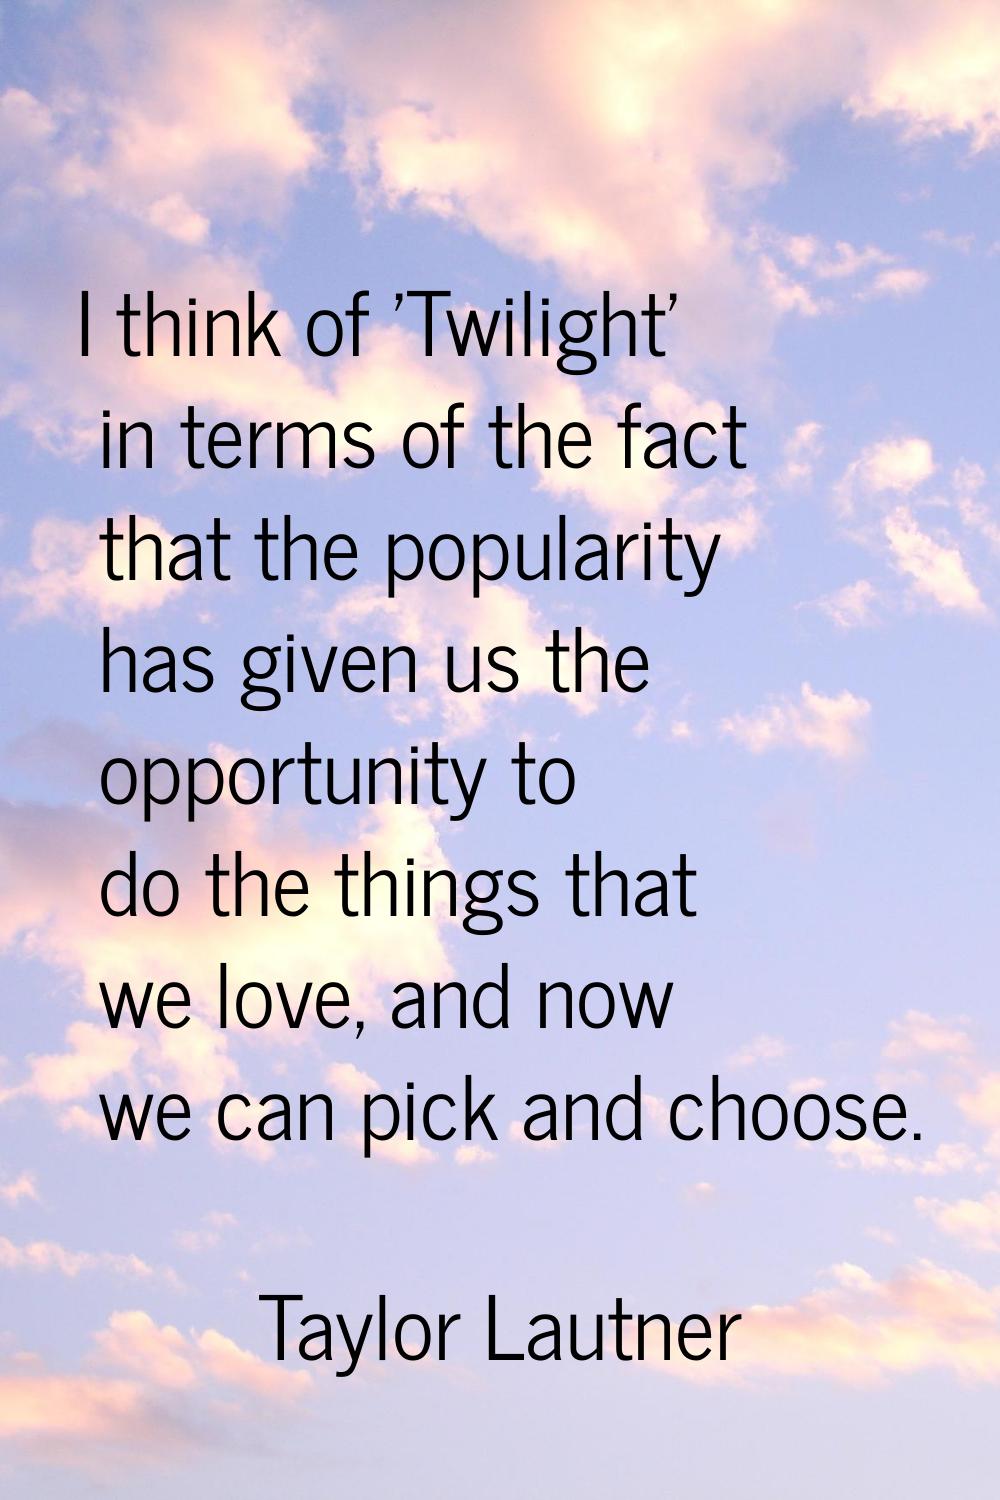 I think of 'Twilight' in terms of the fact that the popularity has given us the opportunity to do t